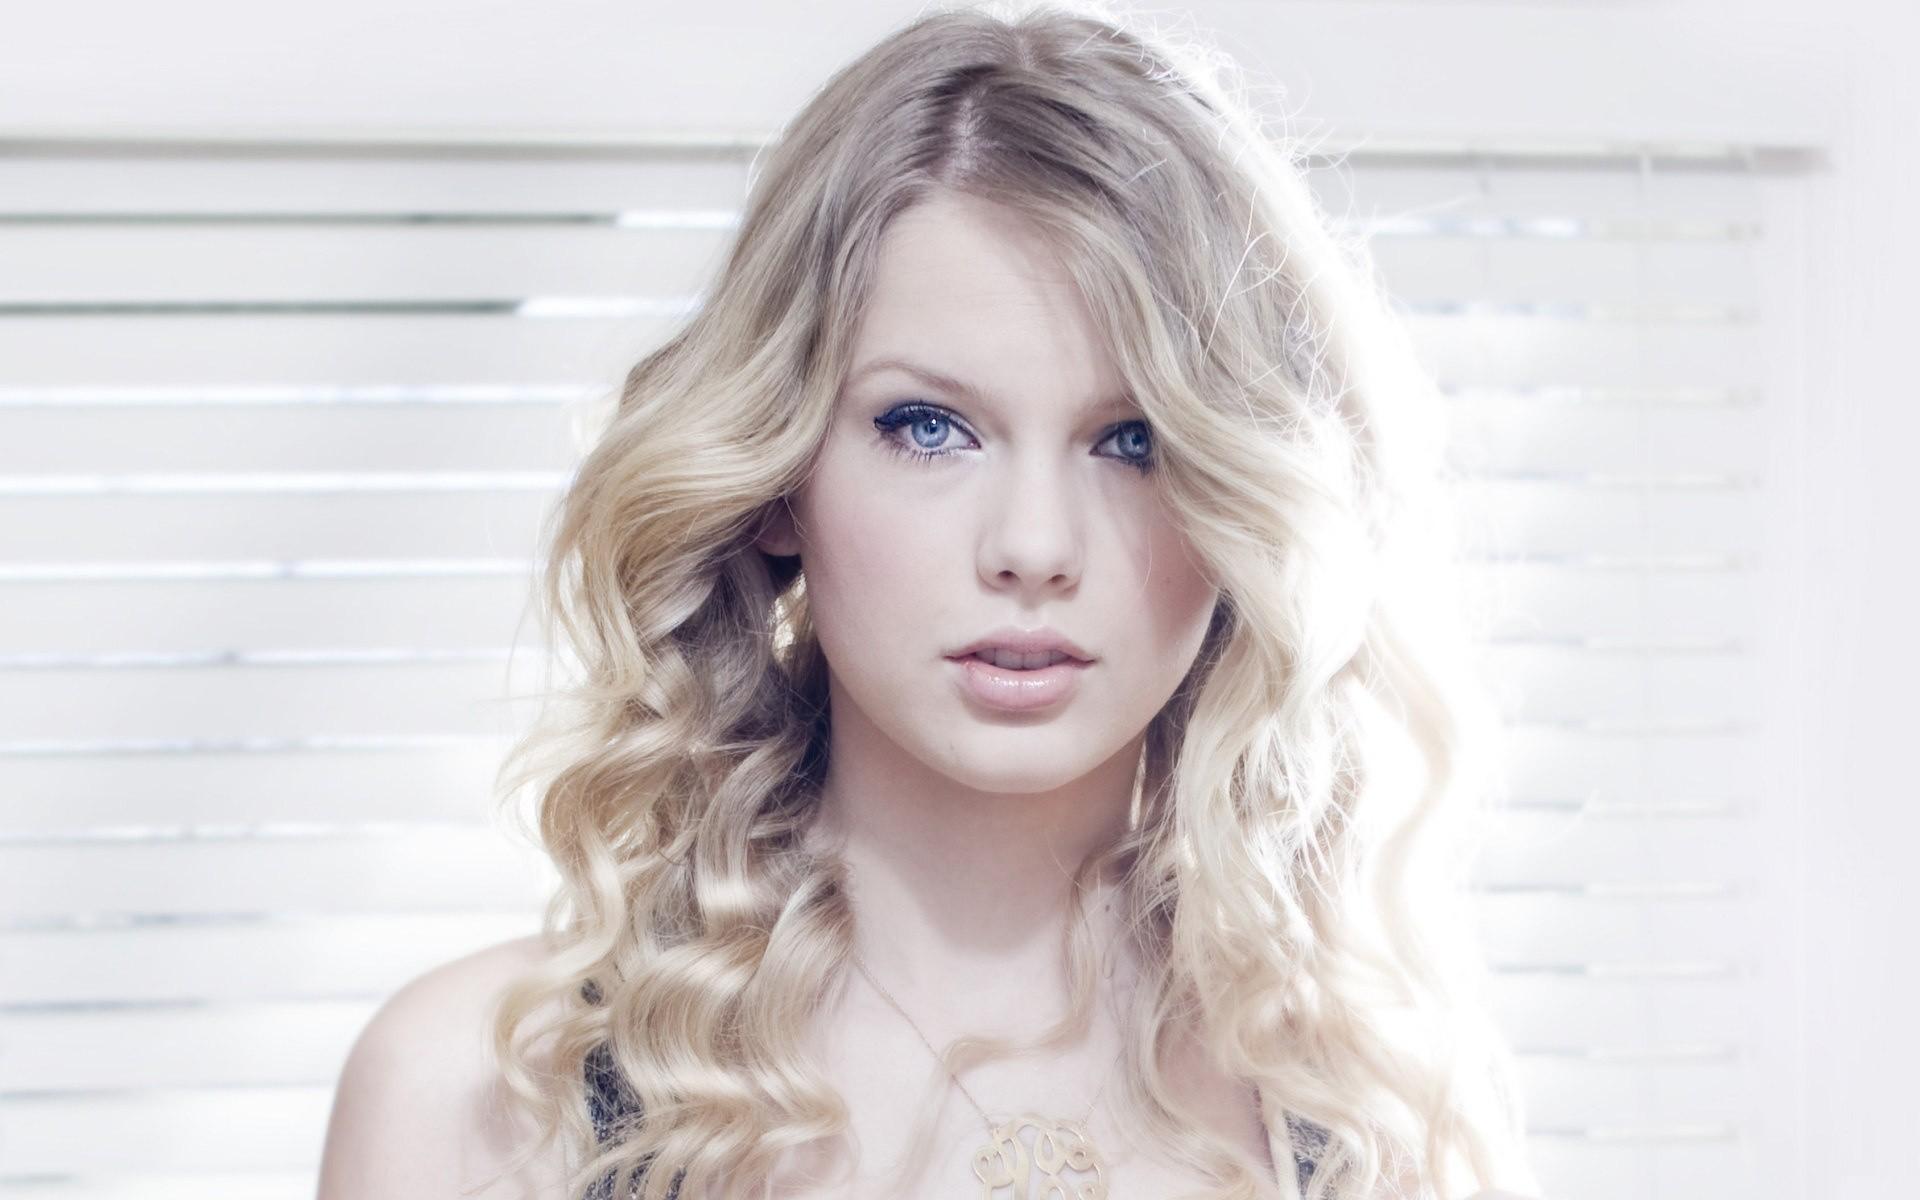 Taylor-Swift-Wallpaper-4 | wallpapers55.com - Best Wallpapers for ...